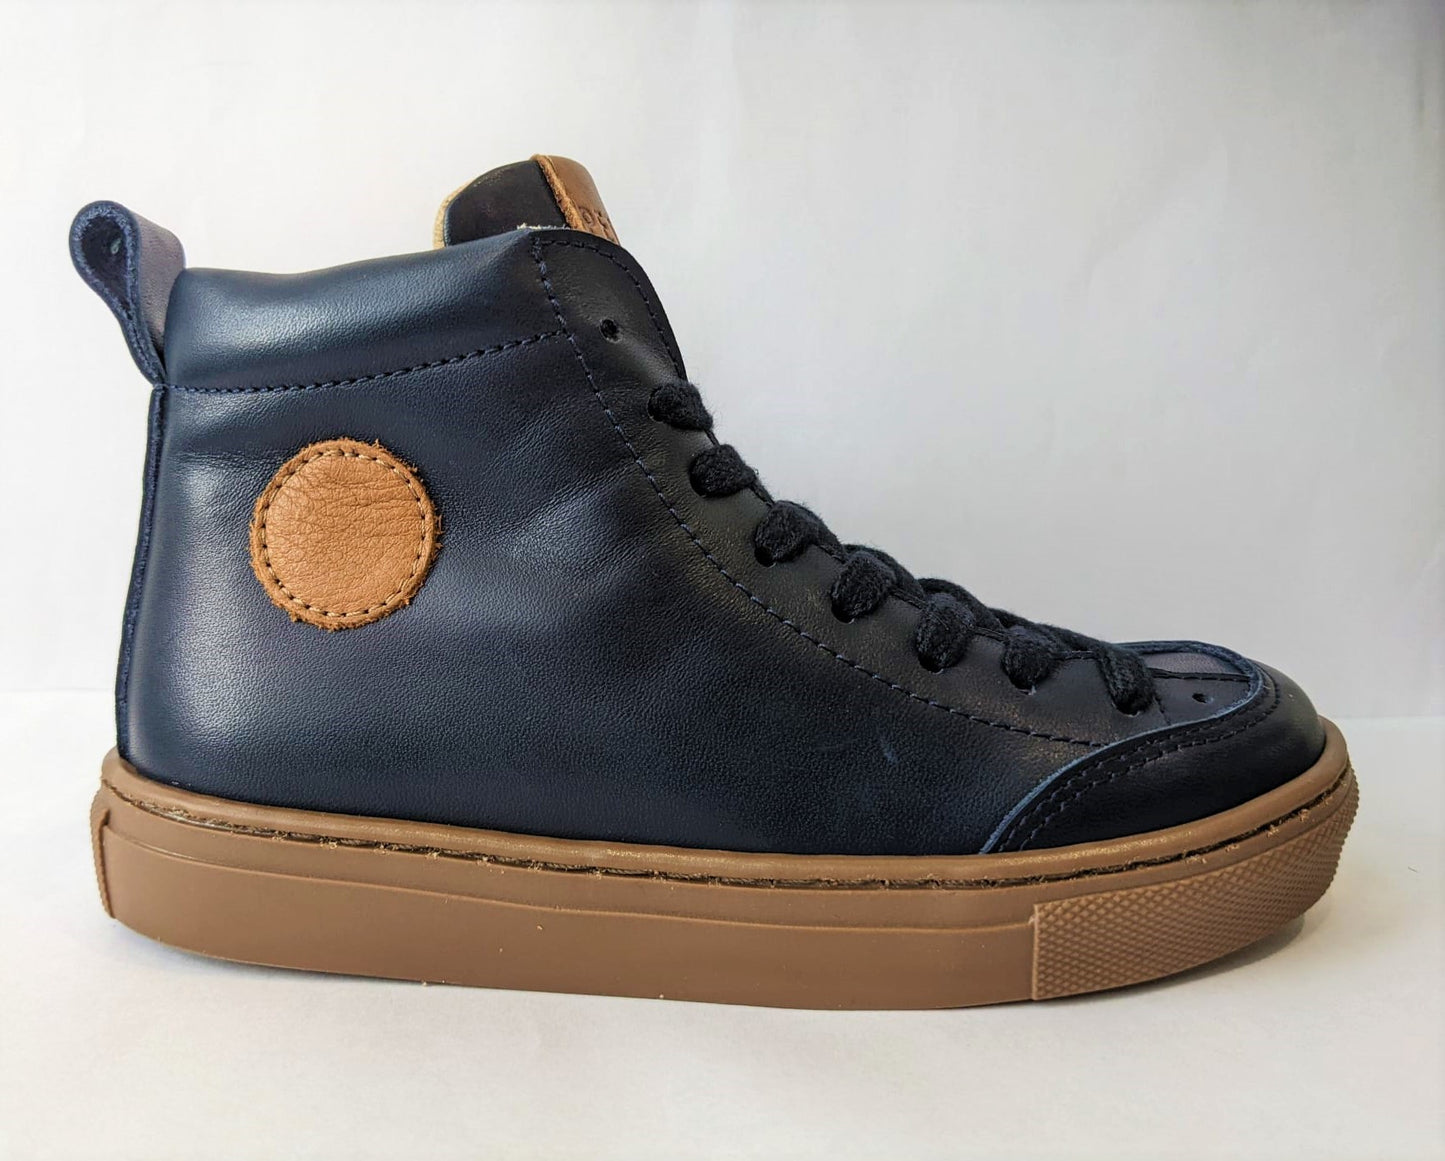 A boys boot by Petasil, style Esme, in navy with lace and side zip fastening. Right side view.